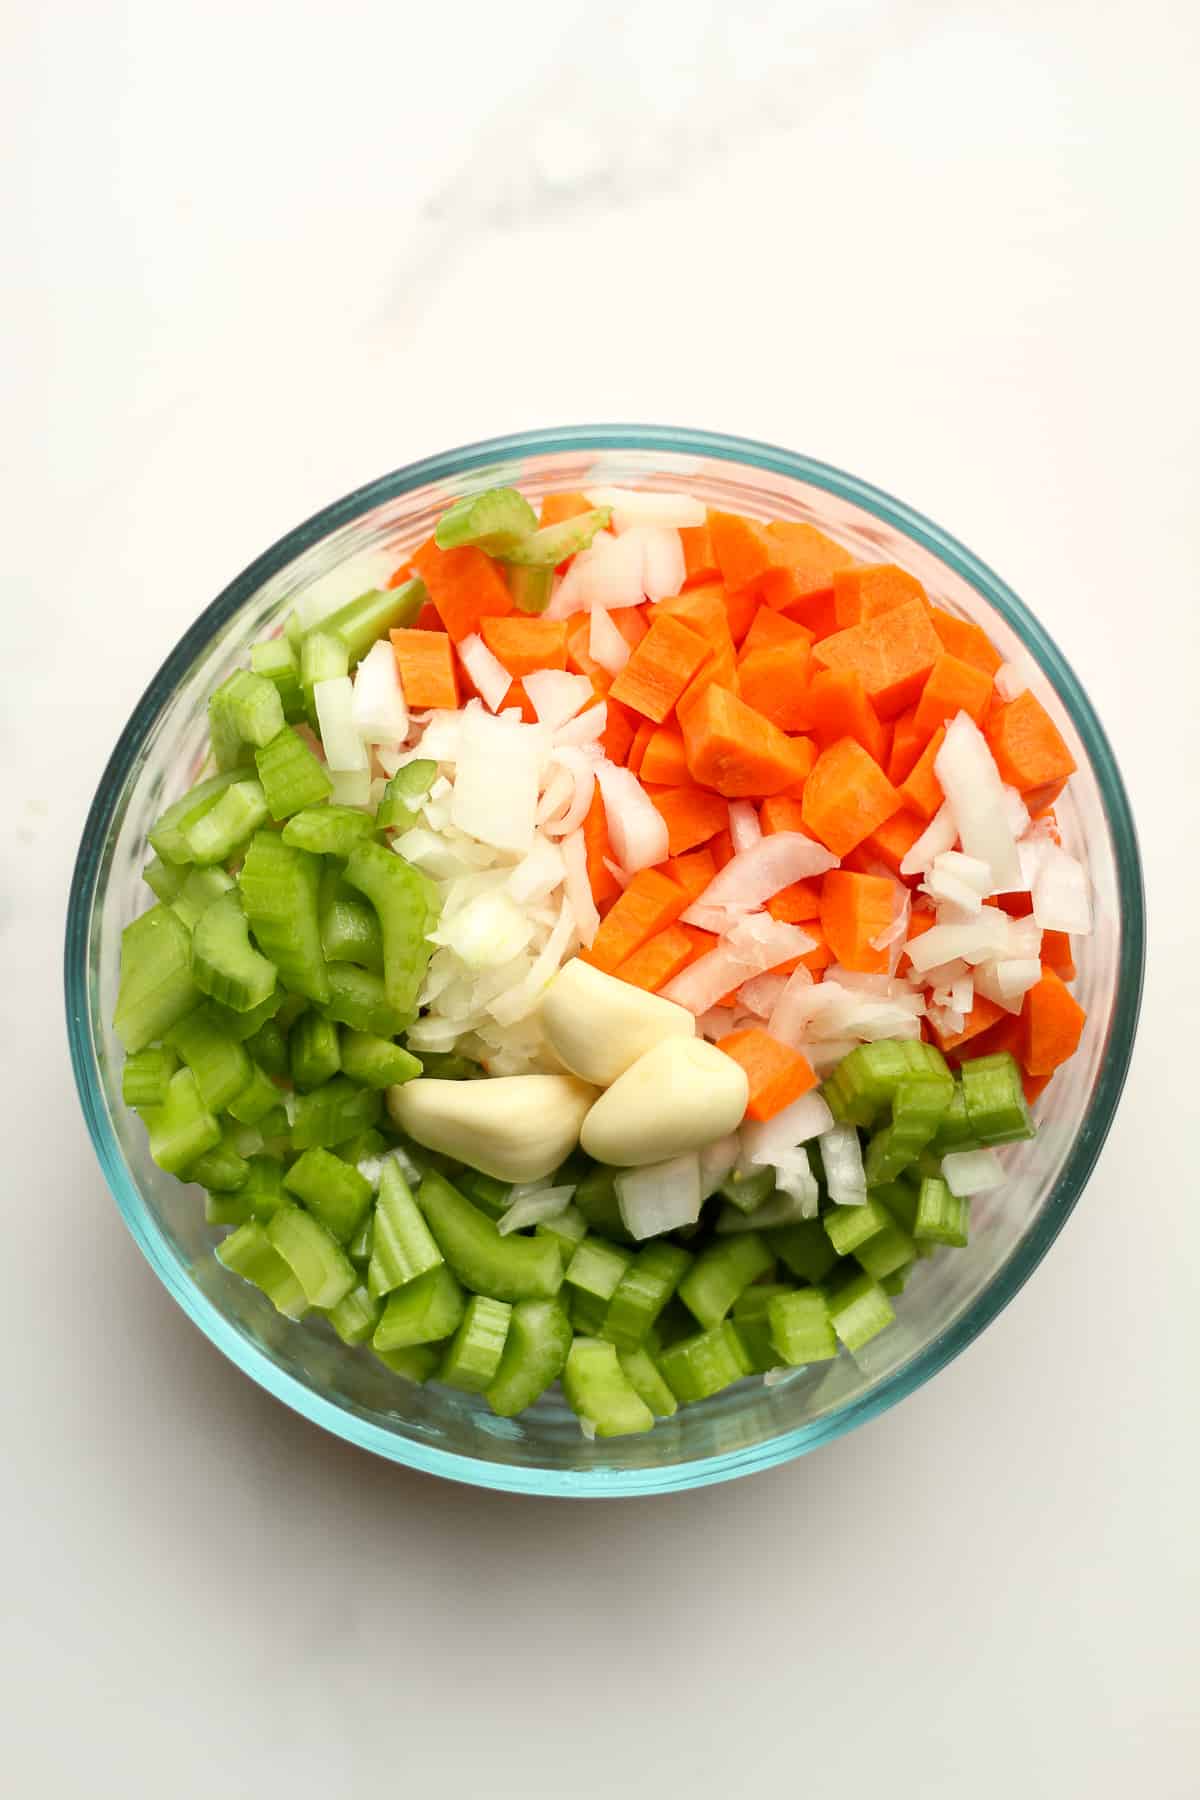 A bowl of diced carrots, celery, onion, and cloves of garlic.